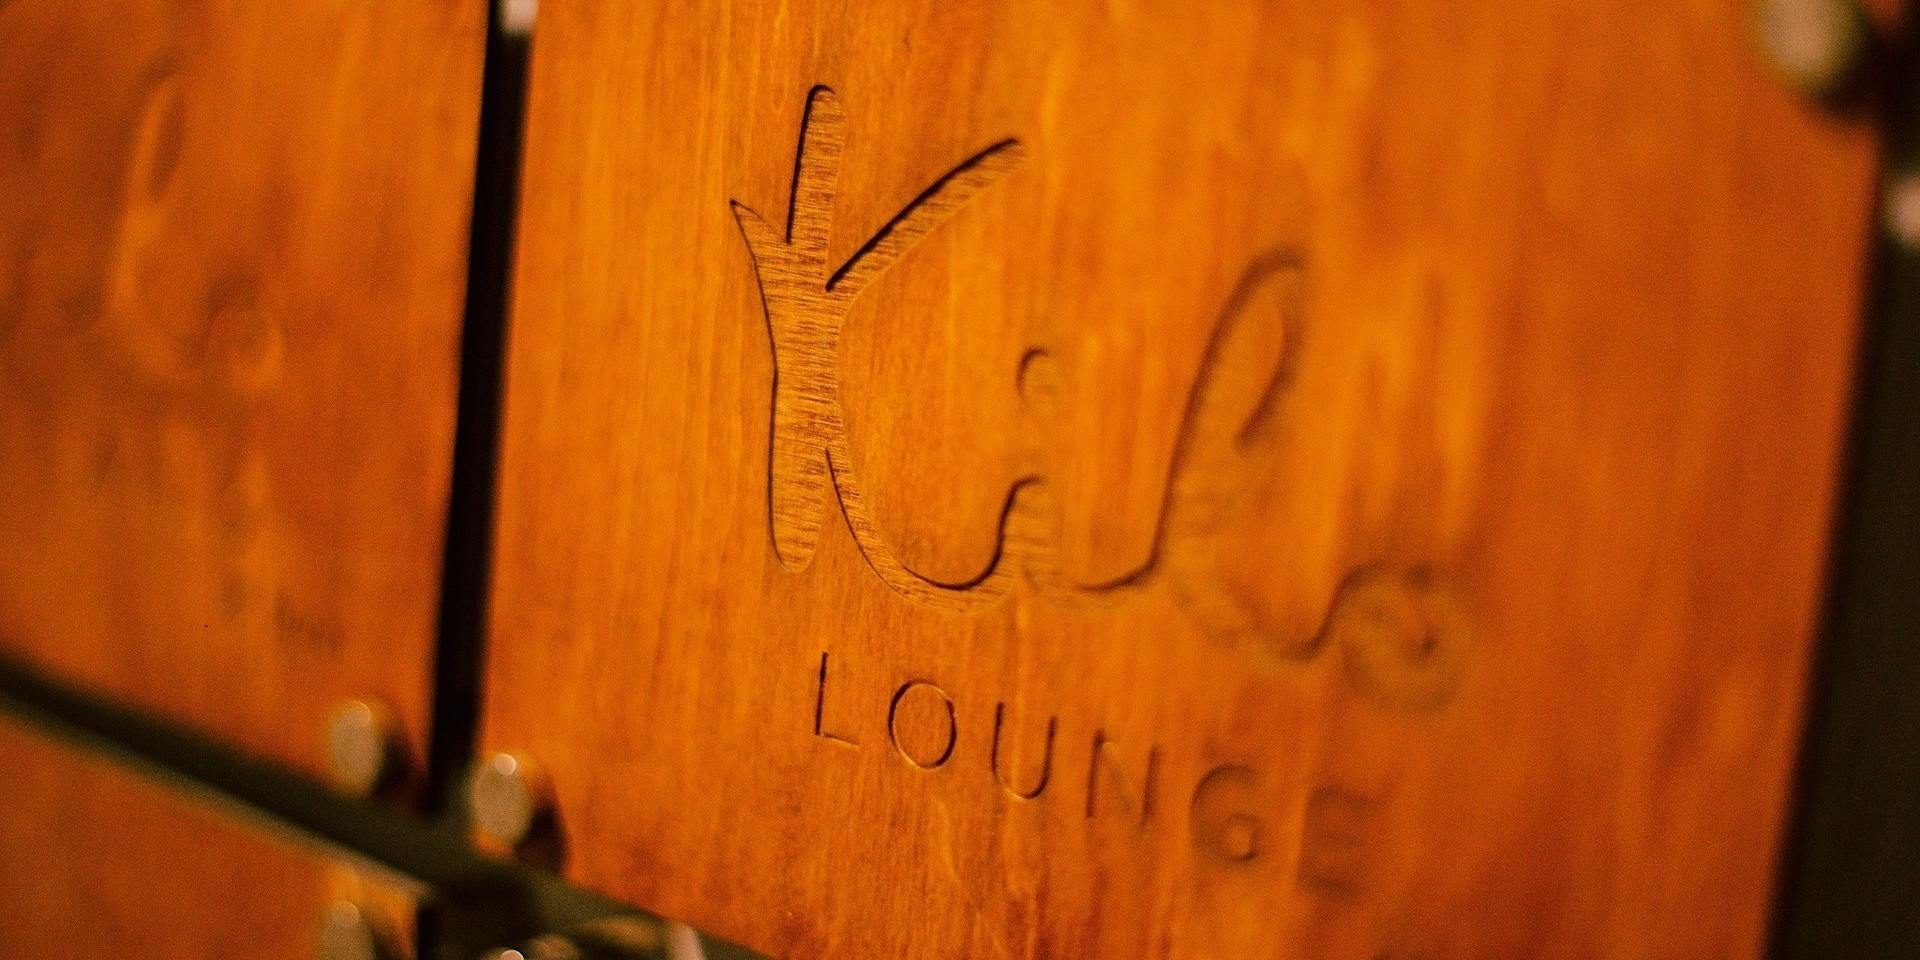 Kilo Lounge makes a celebrated comeback with 'A Series of Intentions' pop-up parties